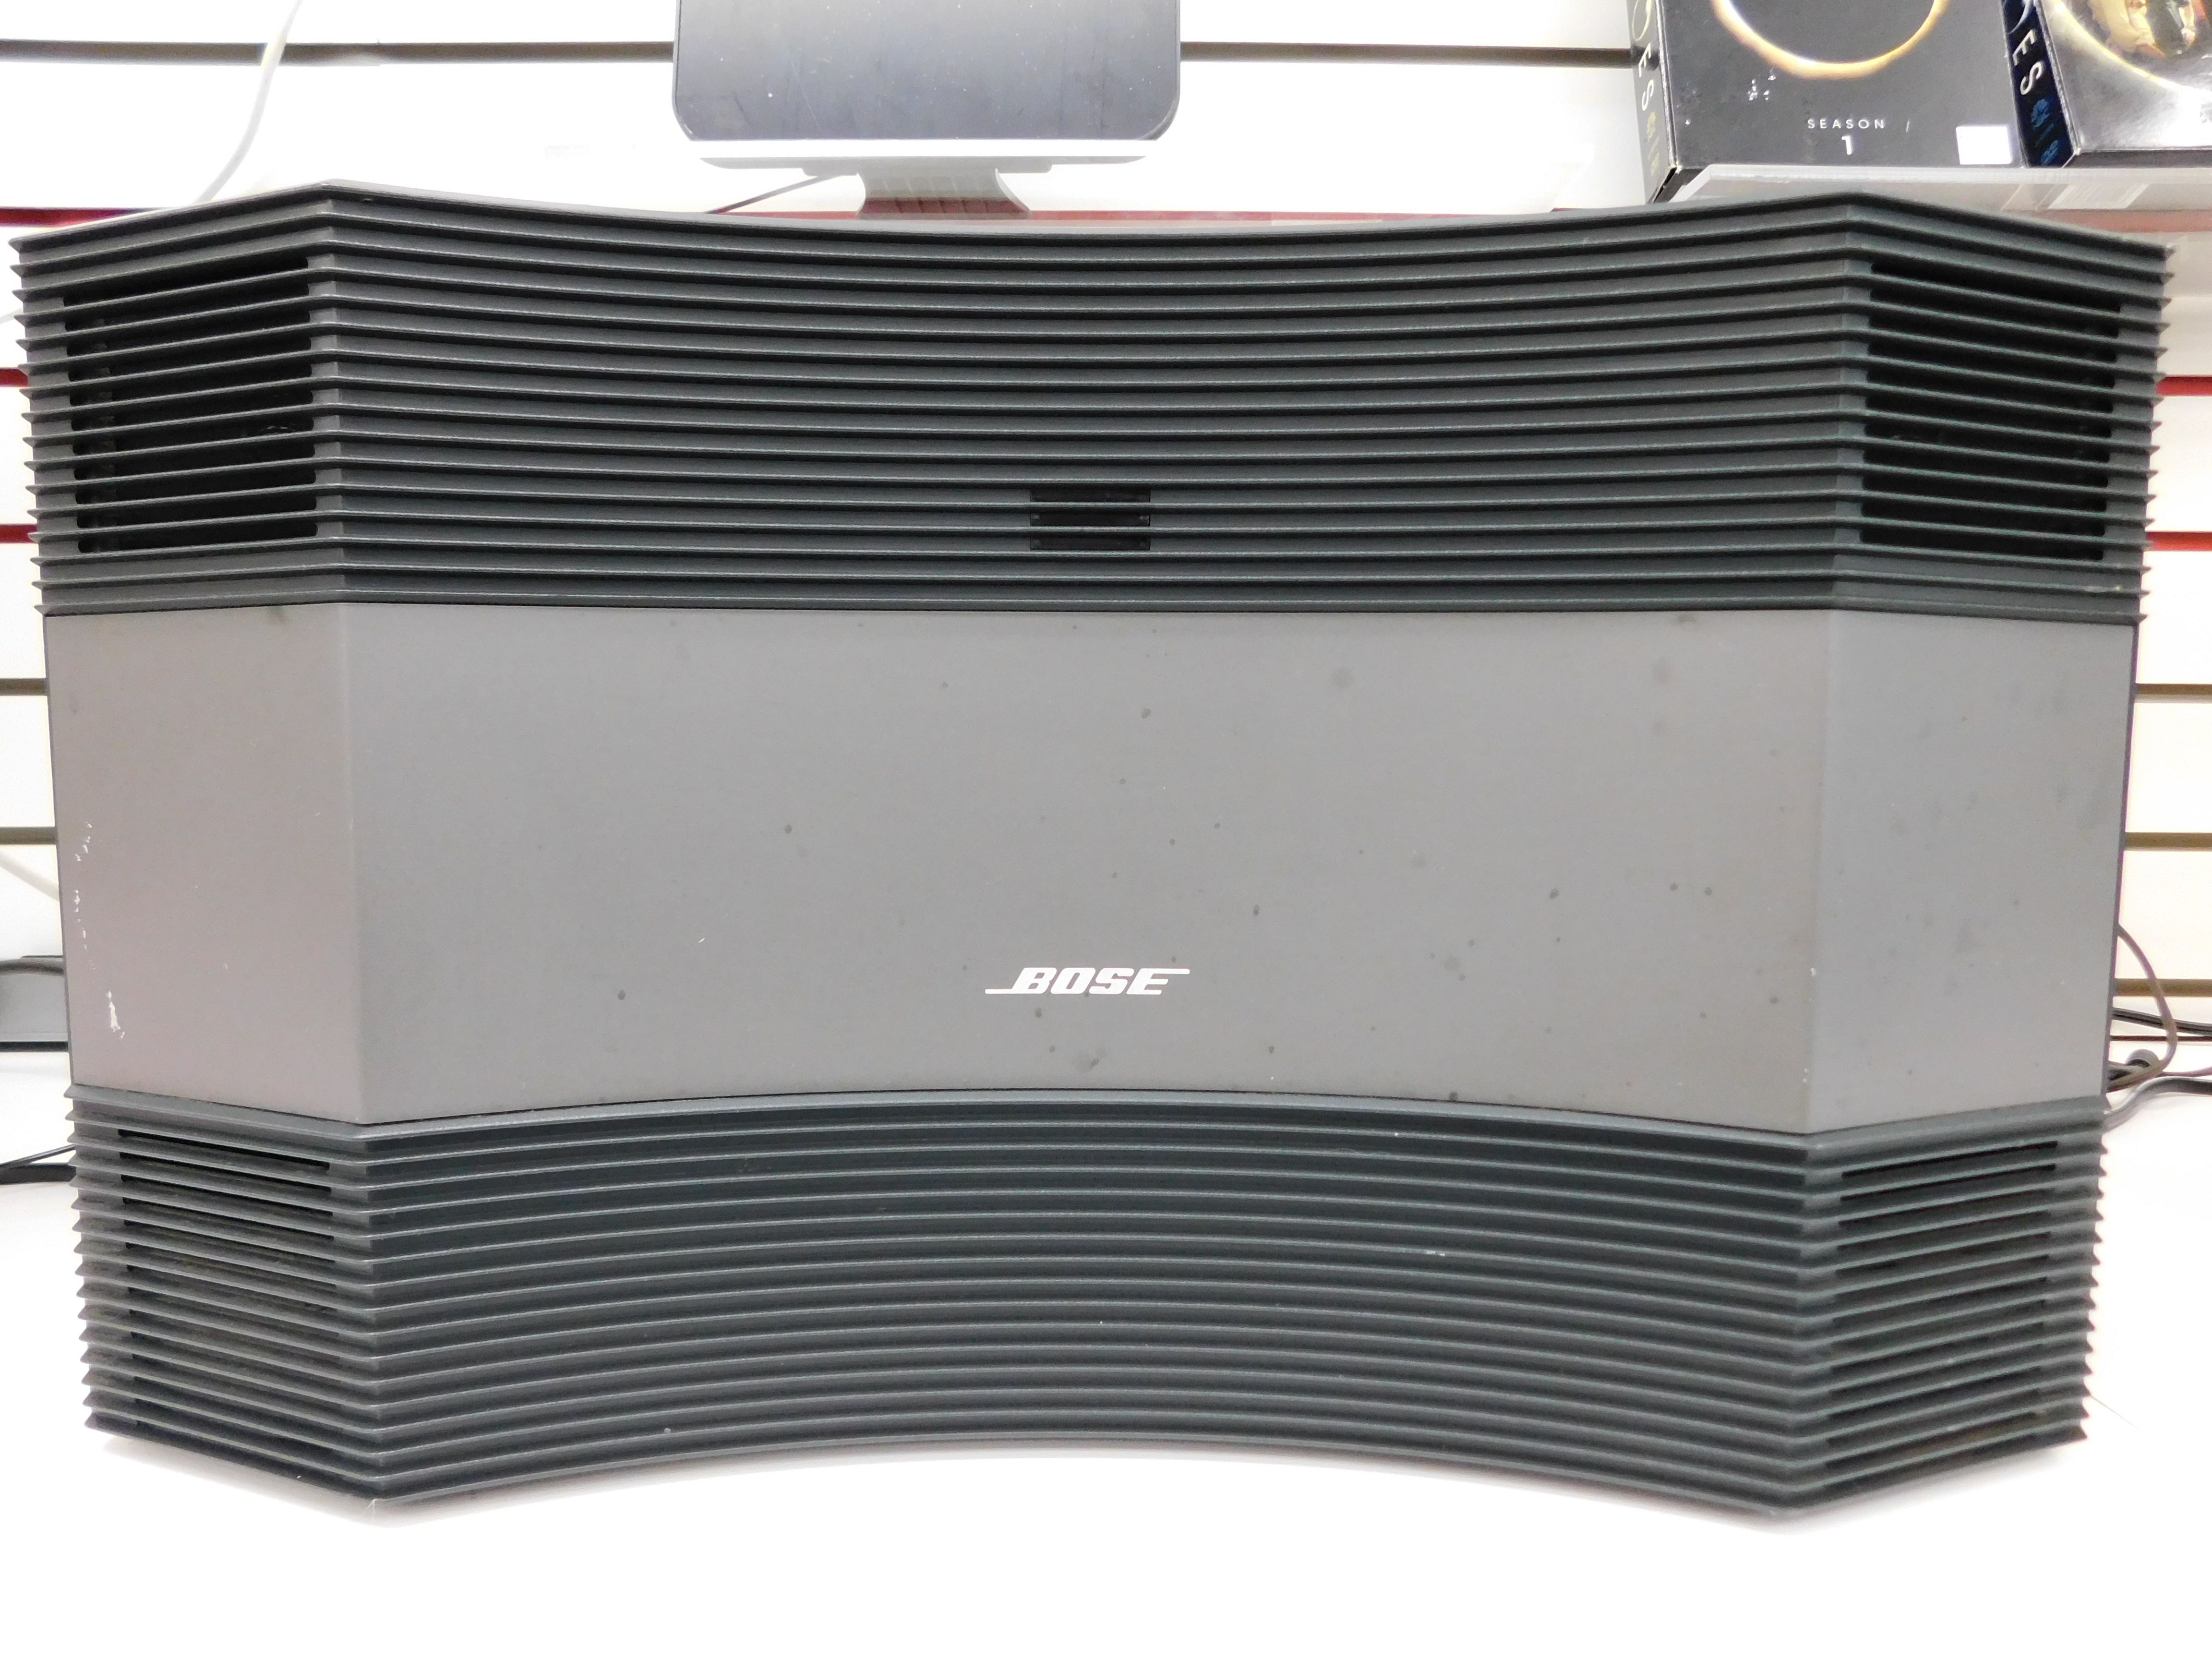 Bose CD-3000 ACOUSTIC WAVE AM/FM RADIO AND CD PLAYER